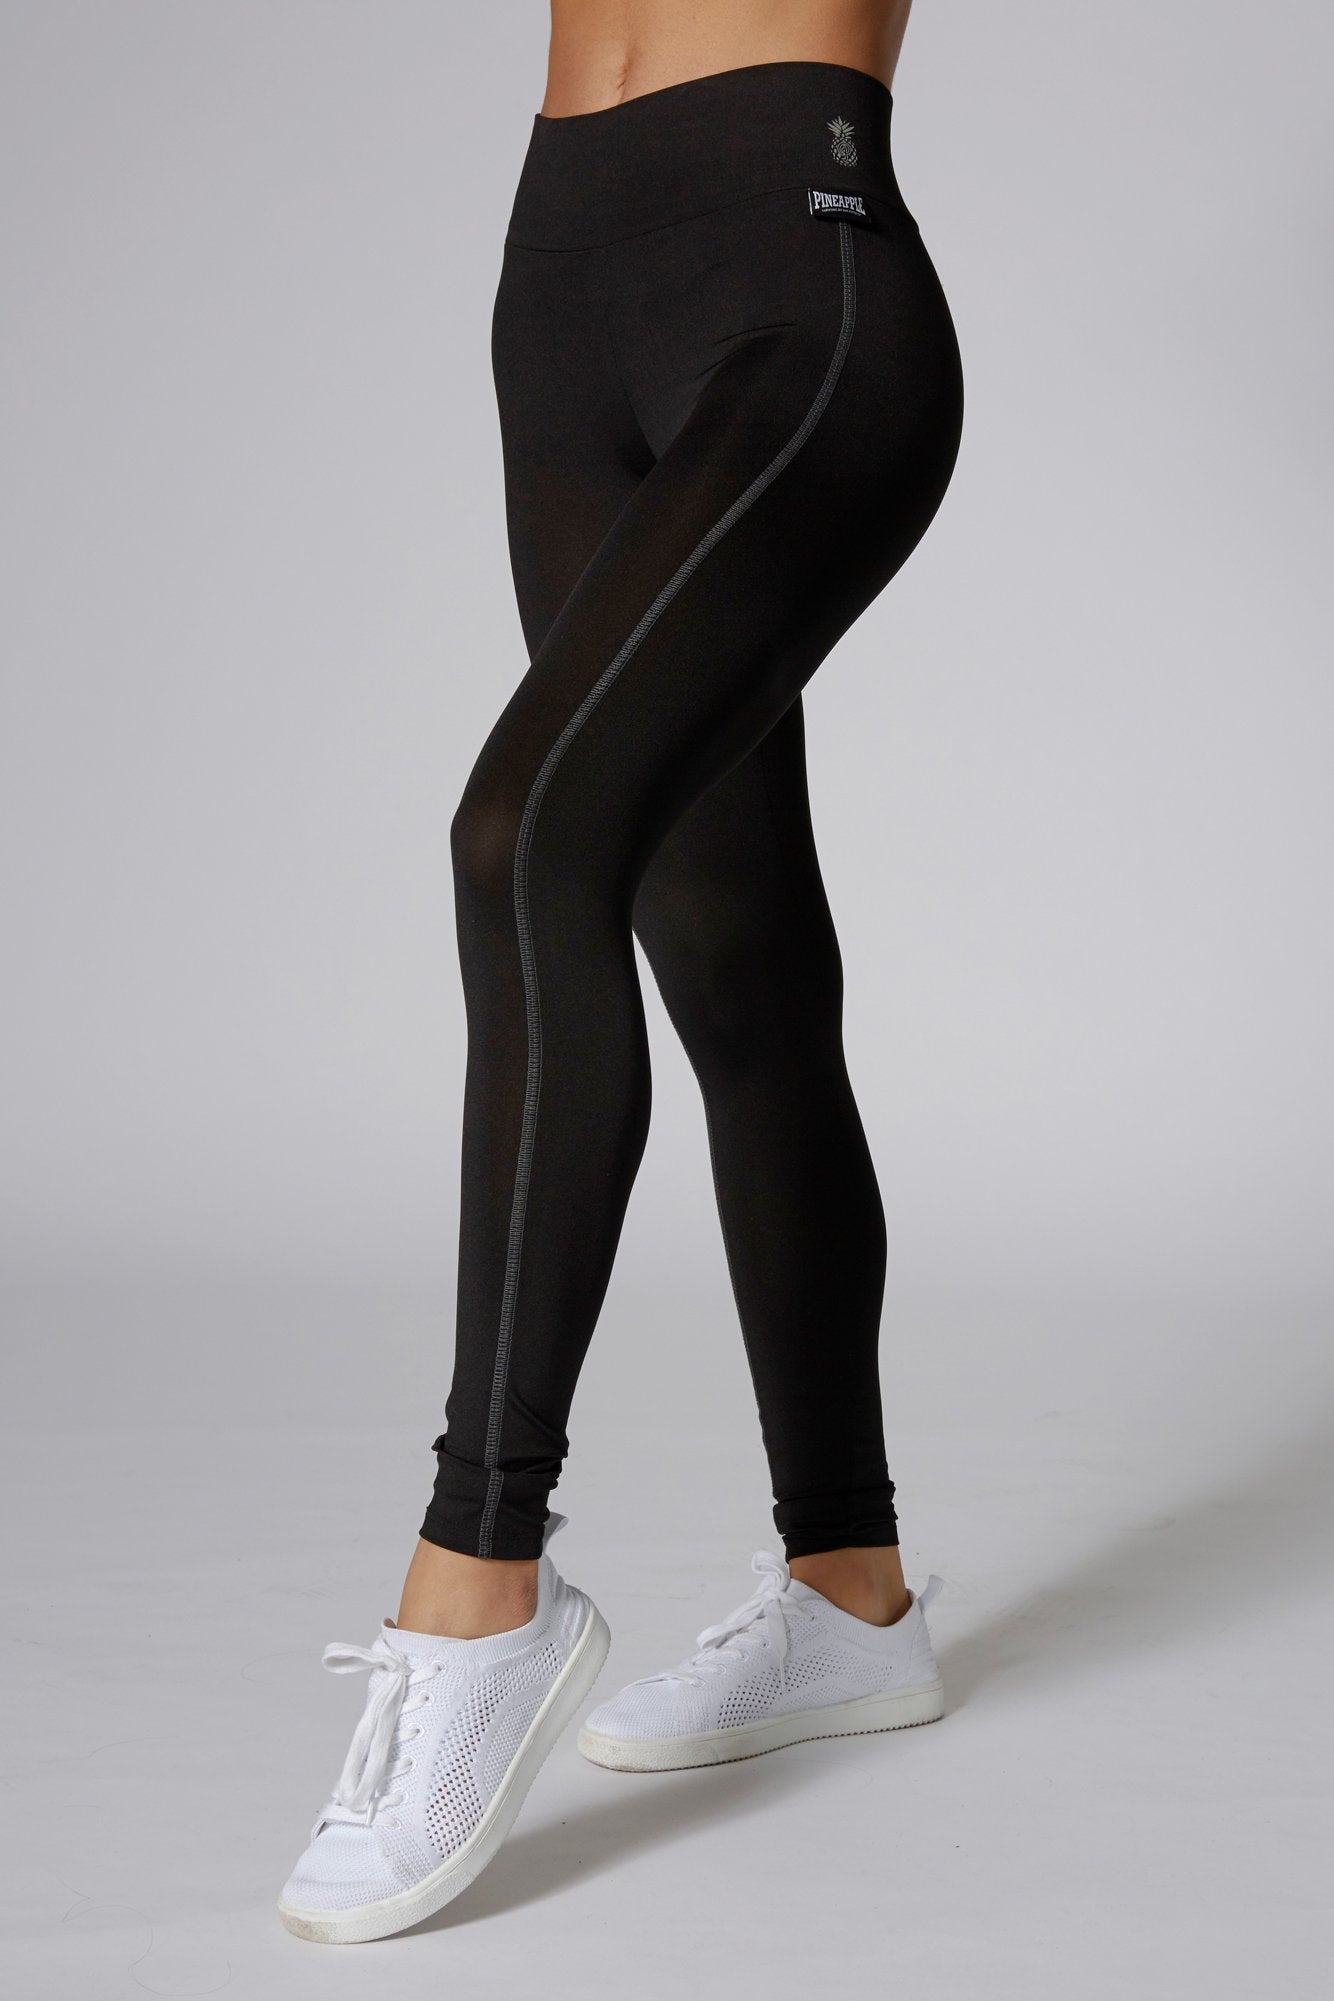 Queen Bee - Jenna High Waist Active Shaping Tights in Black